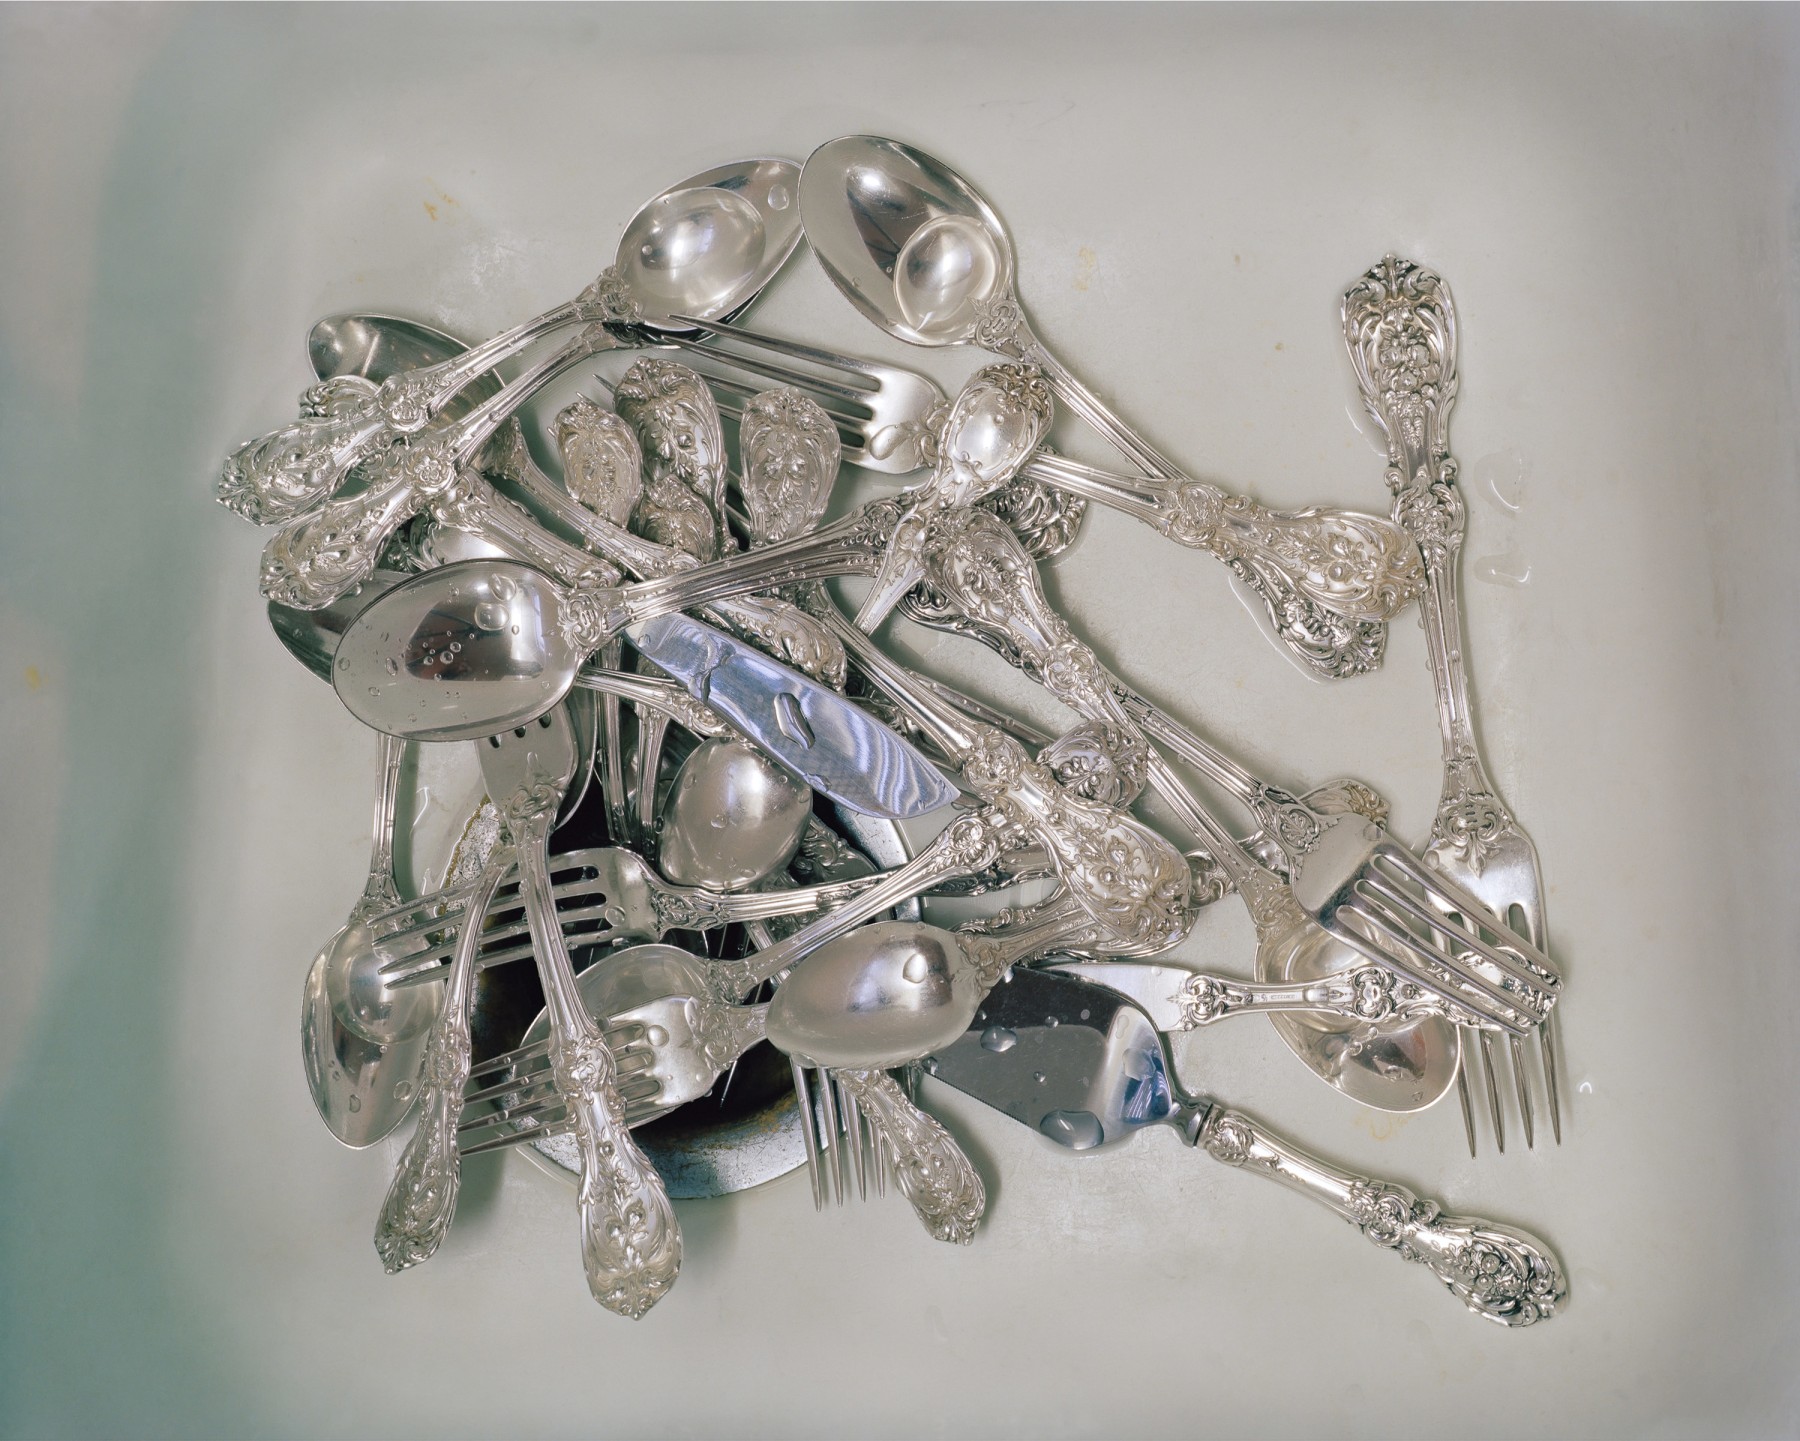 McNair Evans, Wedding Silver, 2010, Archival Pigment Print, 32h x 40w in, Edition of 5, Photography